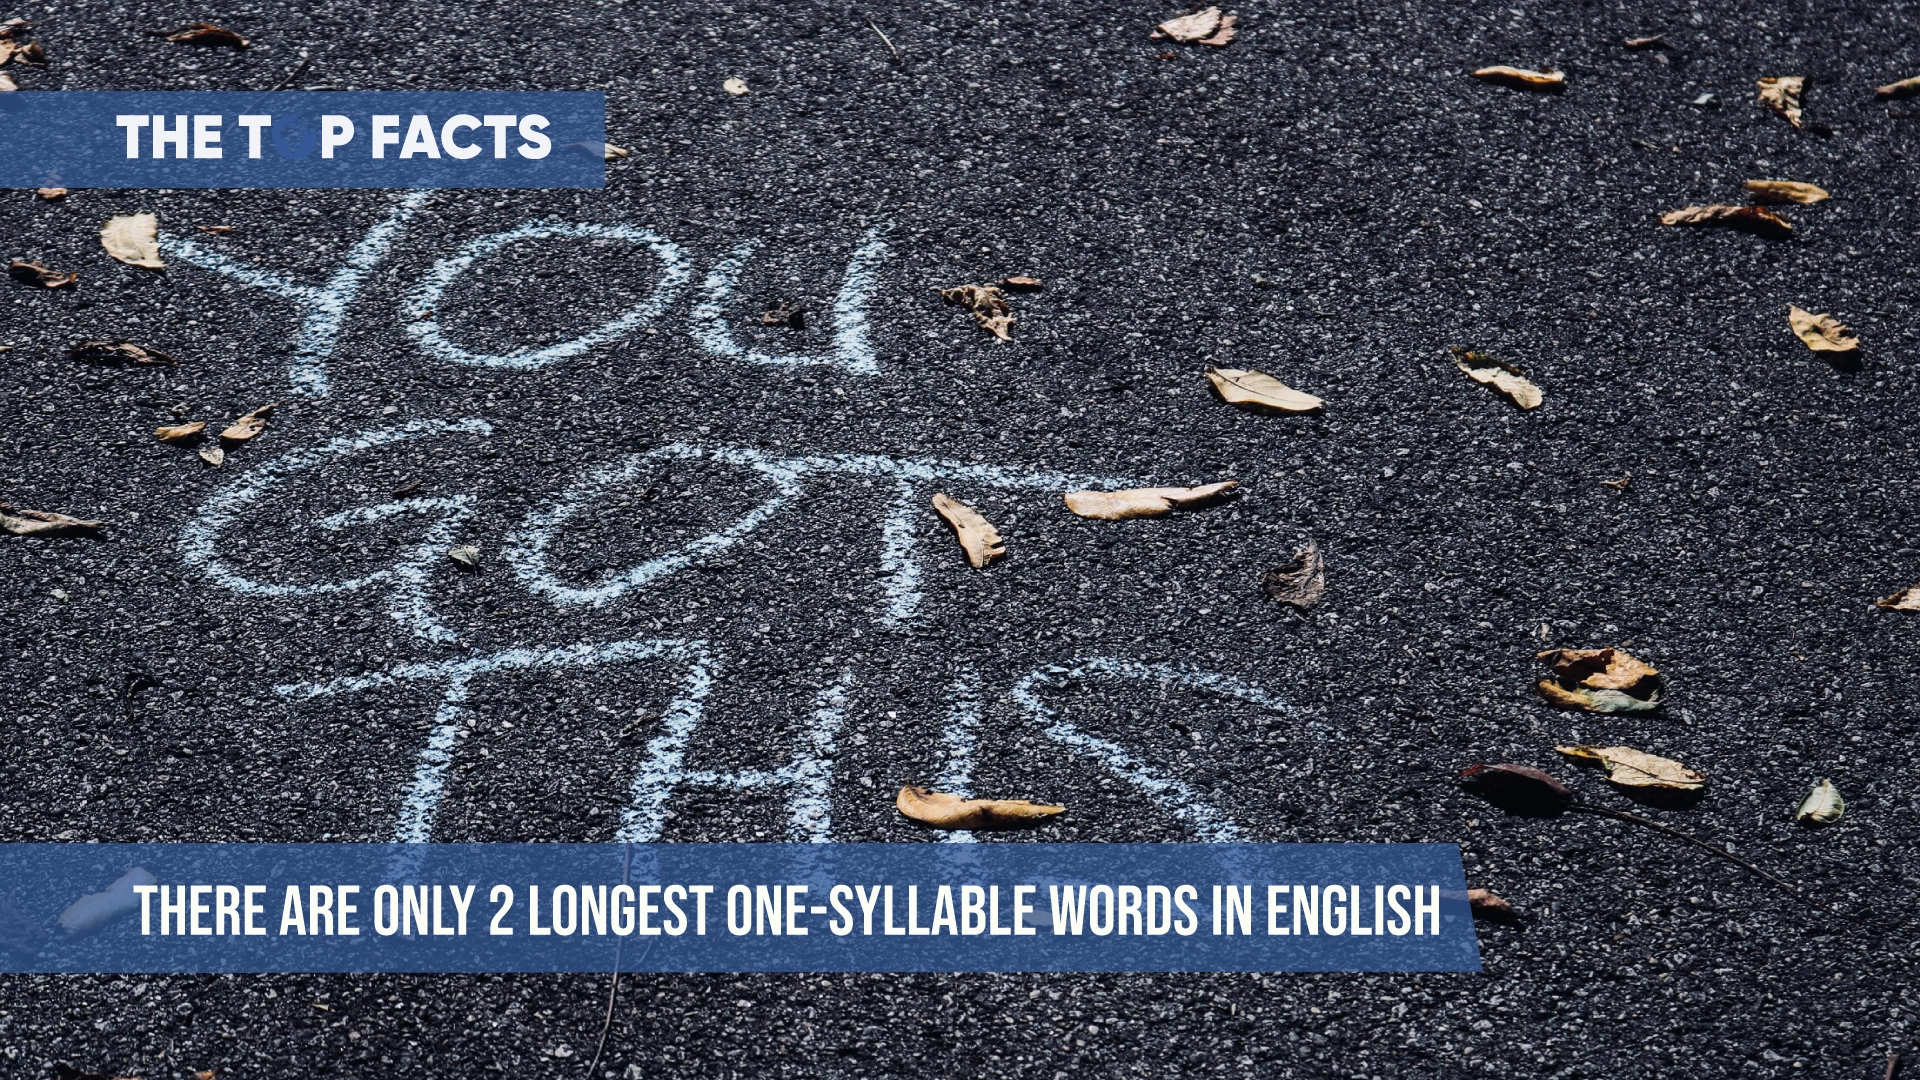 There are only 2 longest one-syllable words in English